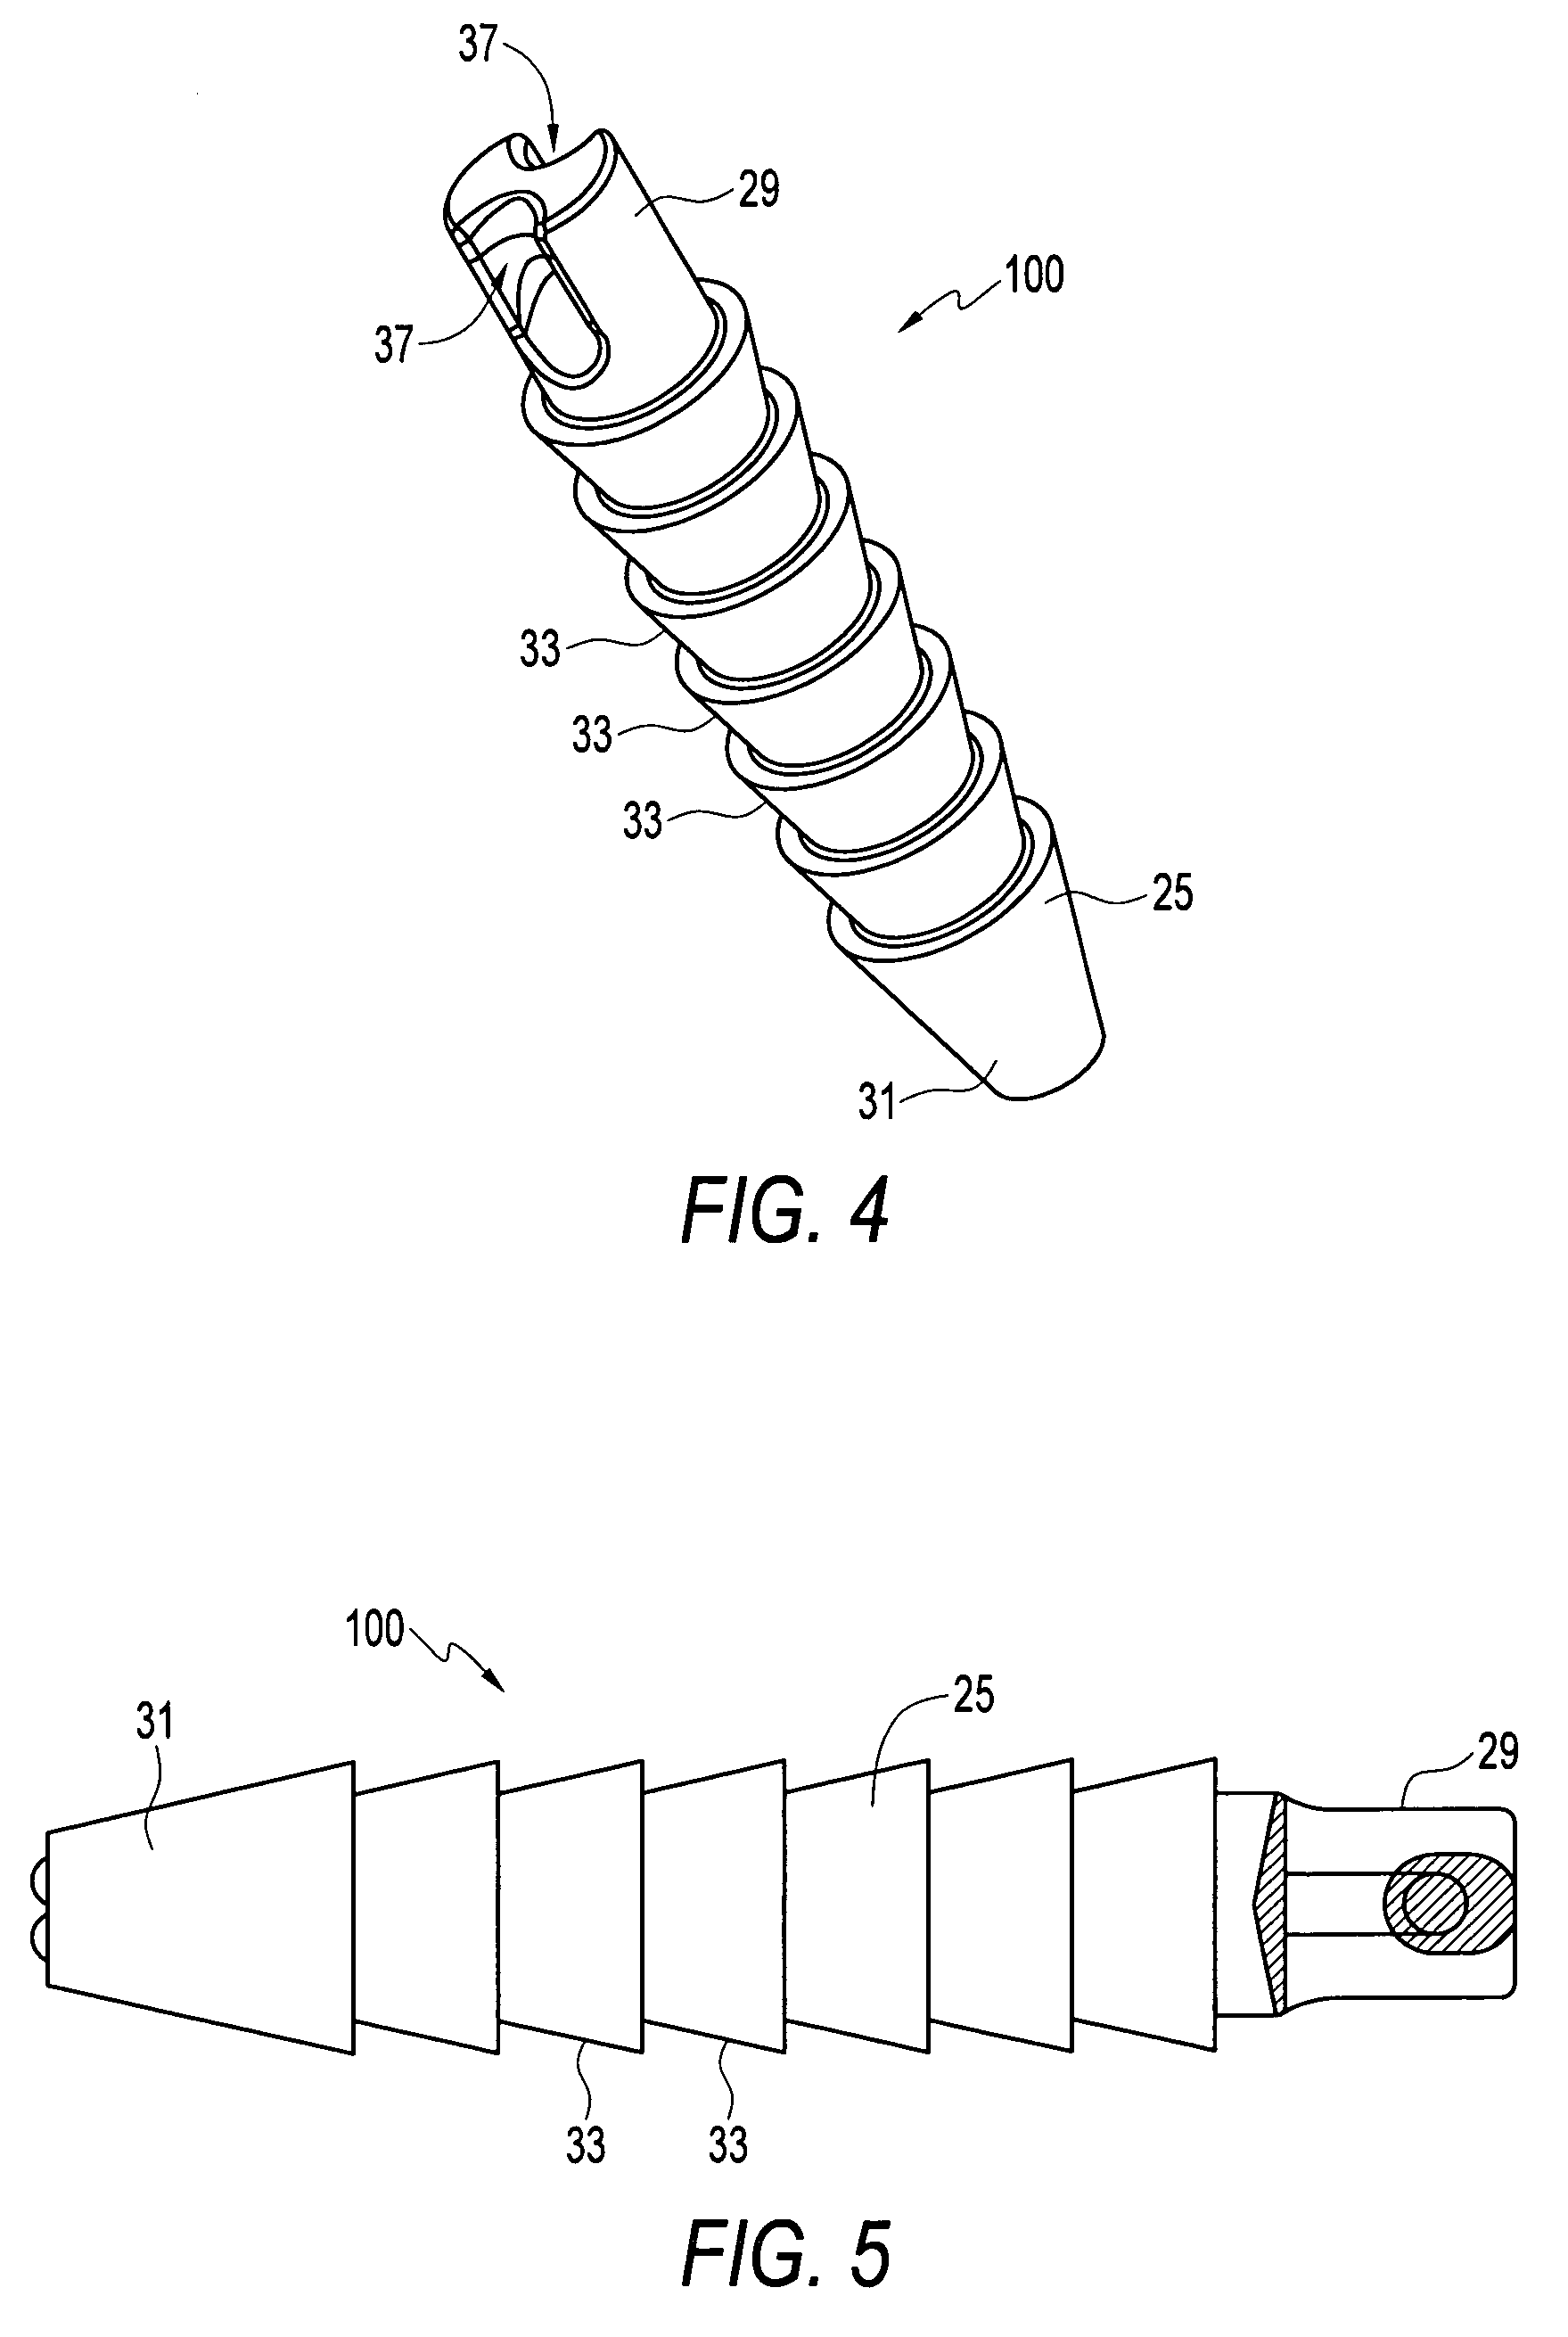 Suture anchor with insert-molded suture eyelet